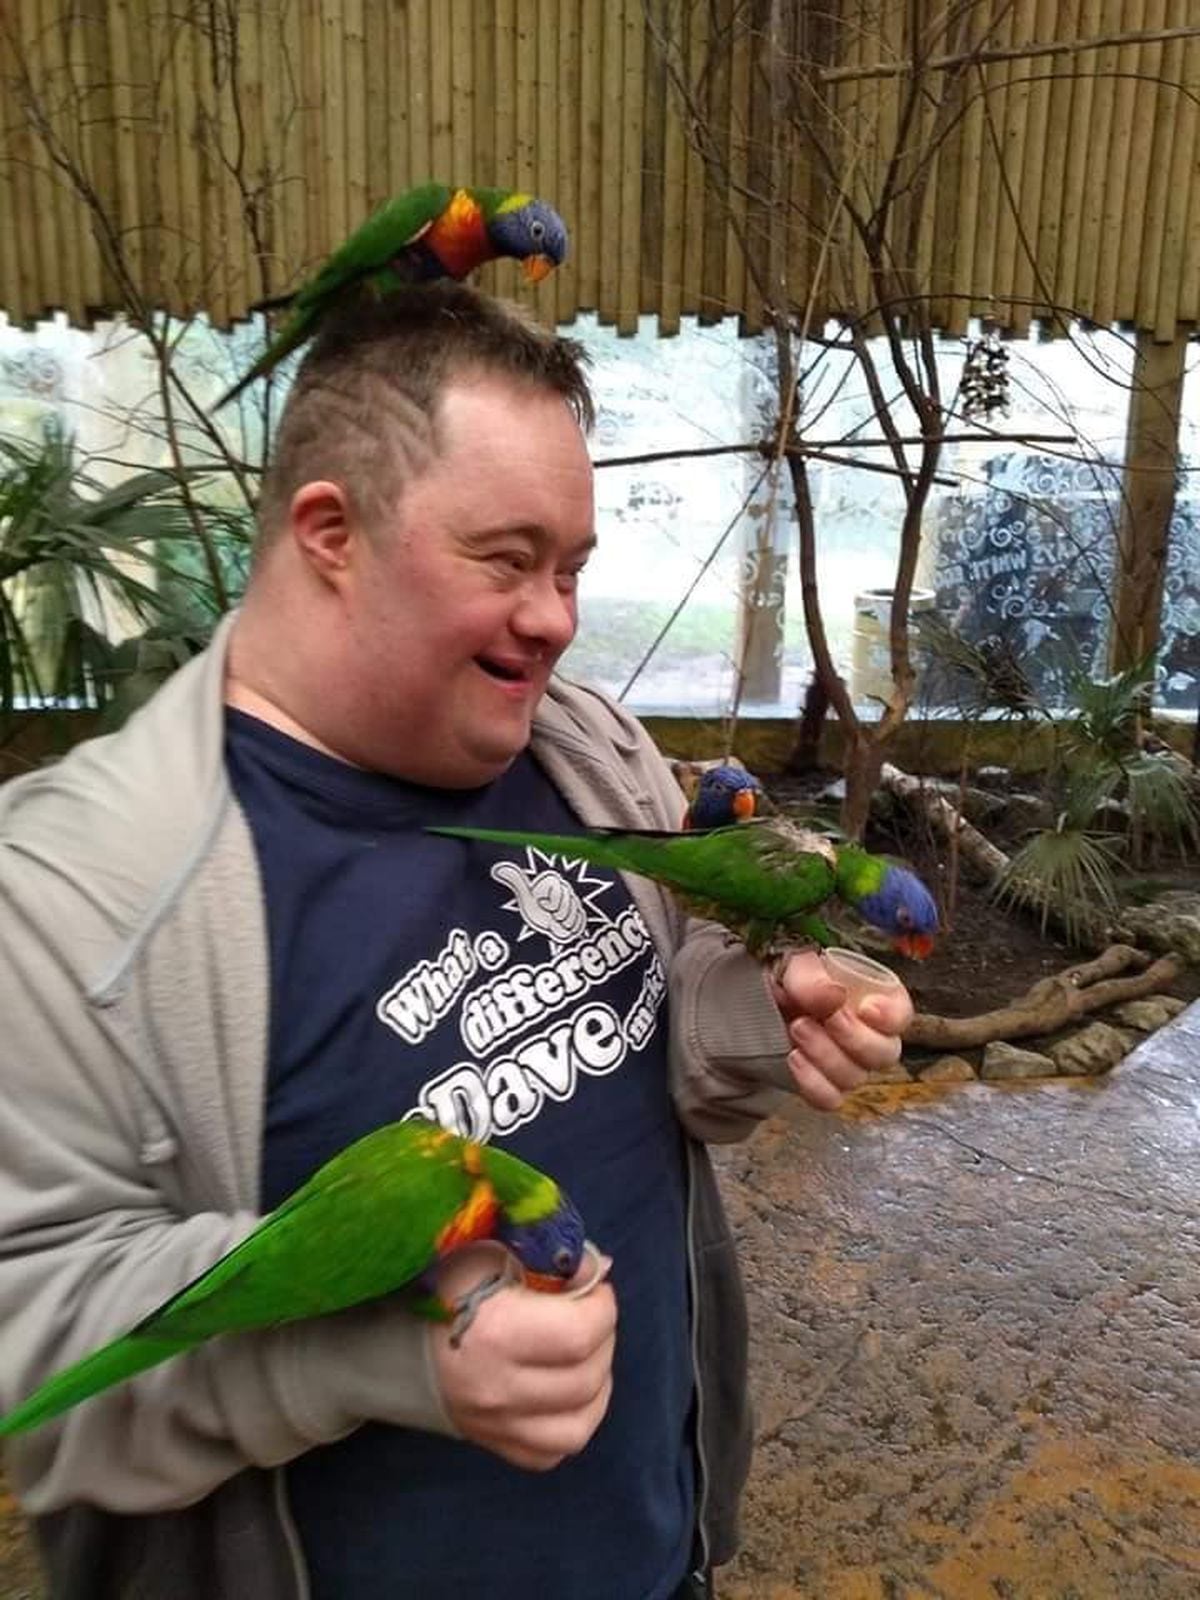 David is a frequent visitor with his carer